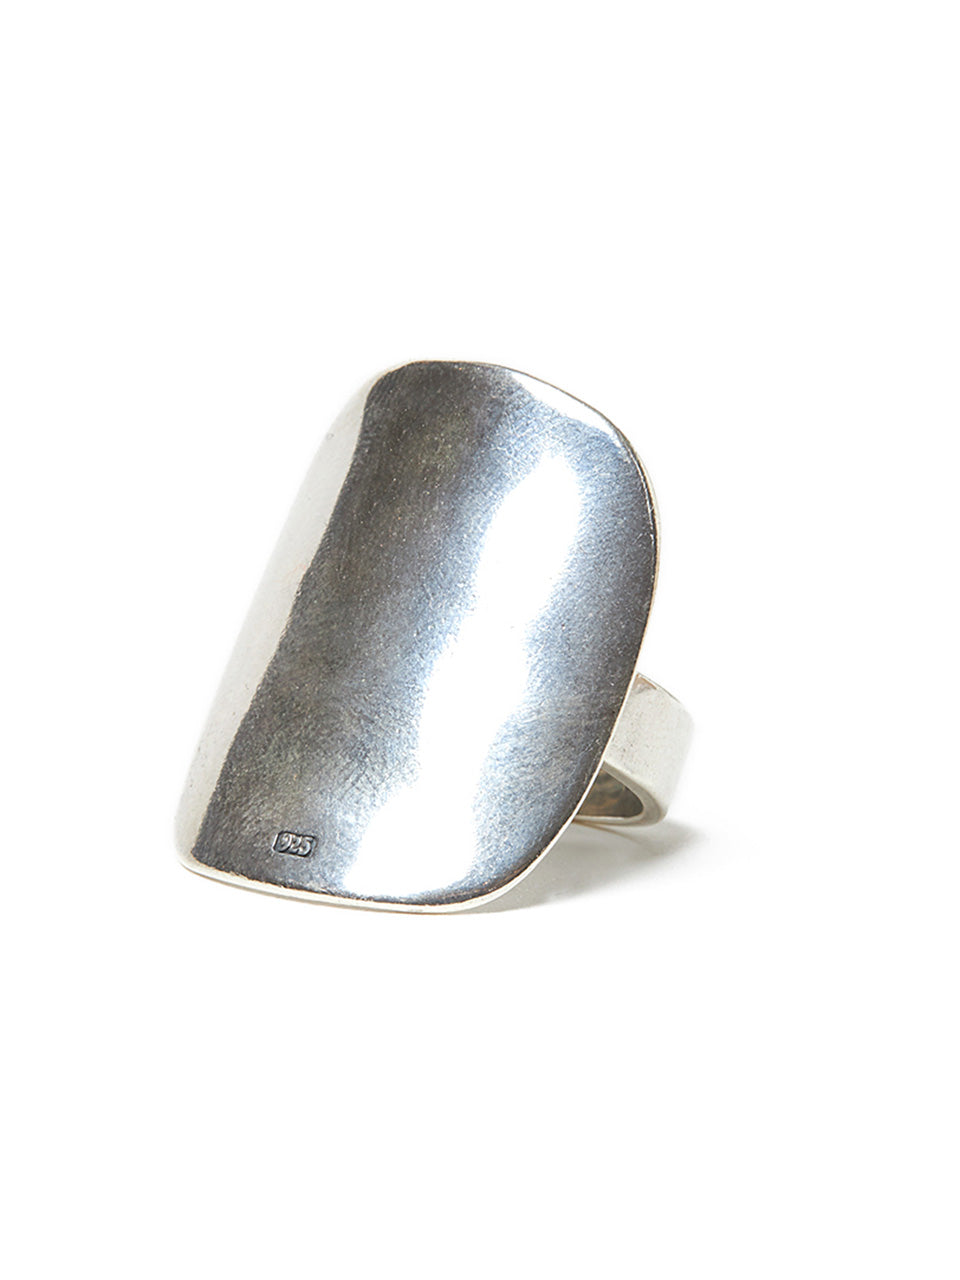 HK Pacifism Ring by END Side B (silver)